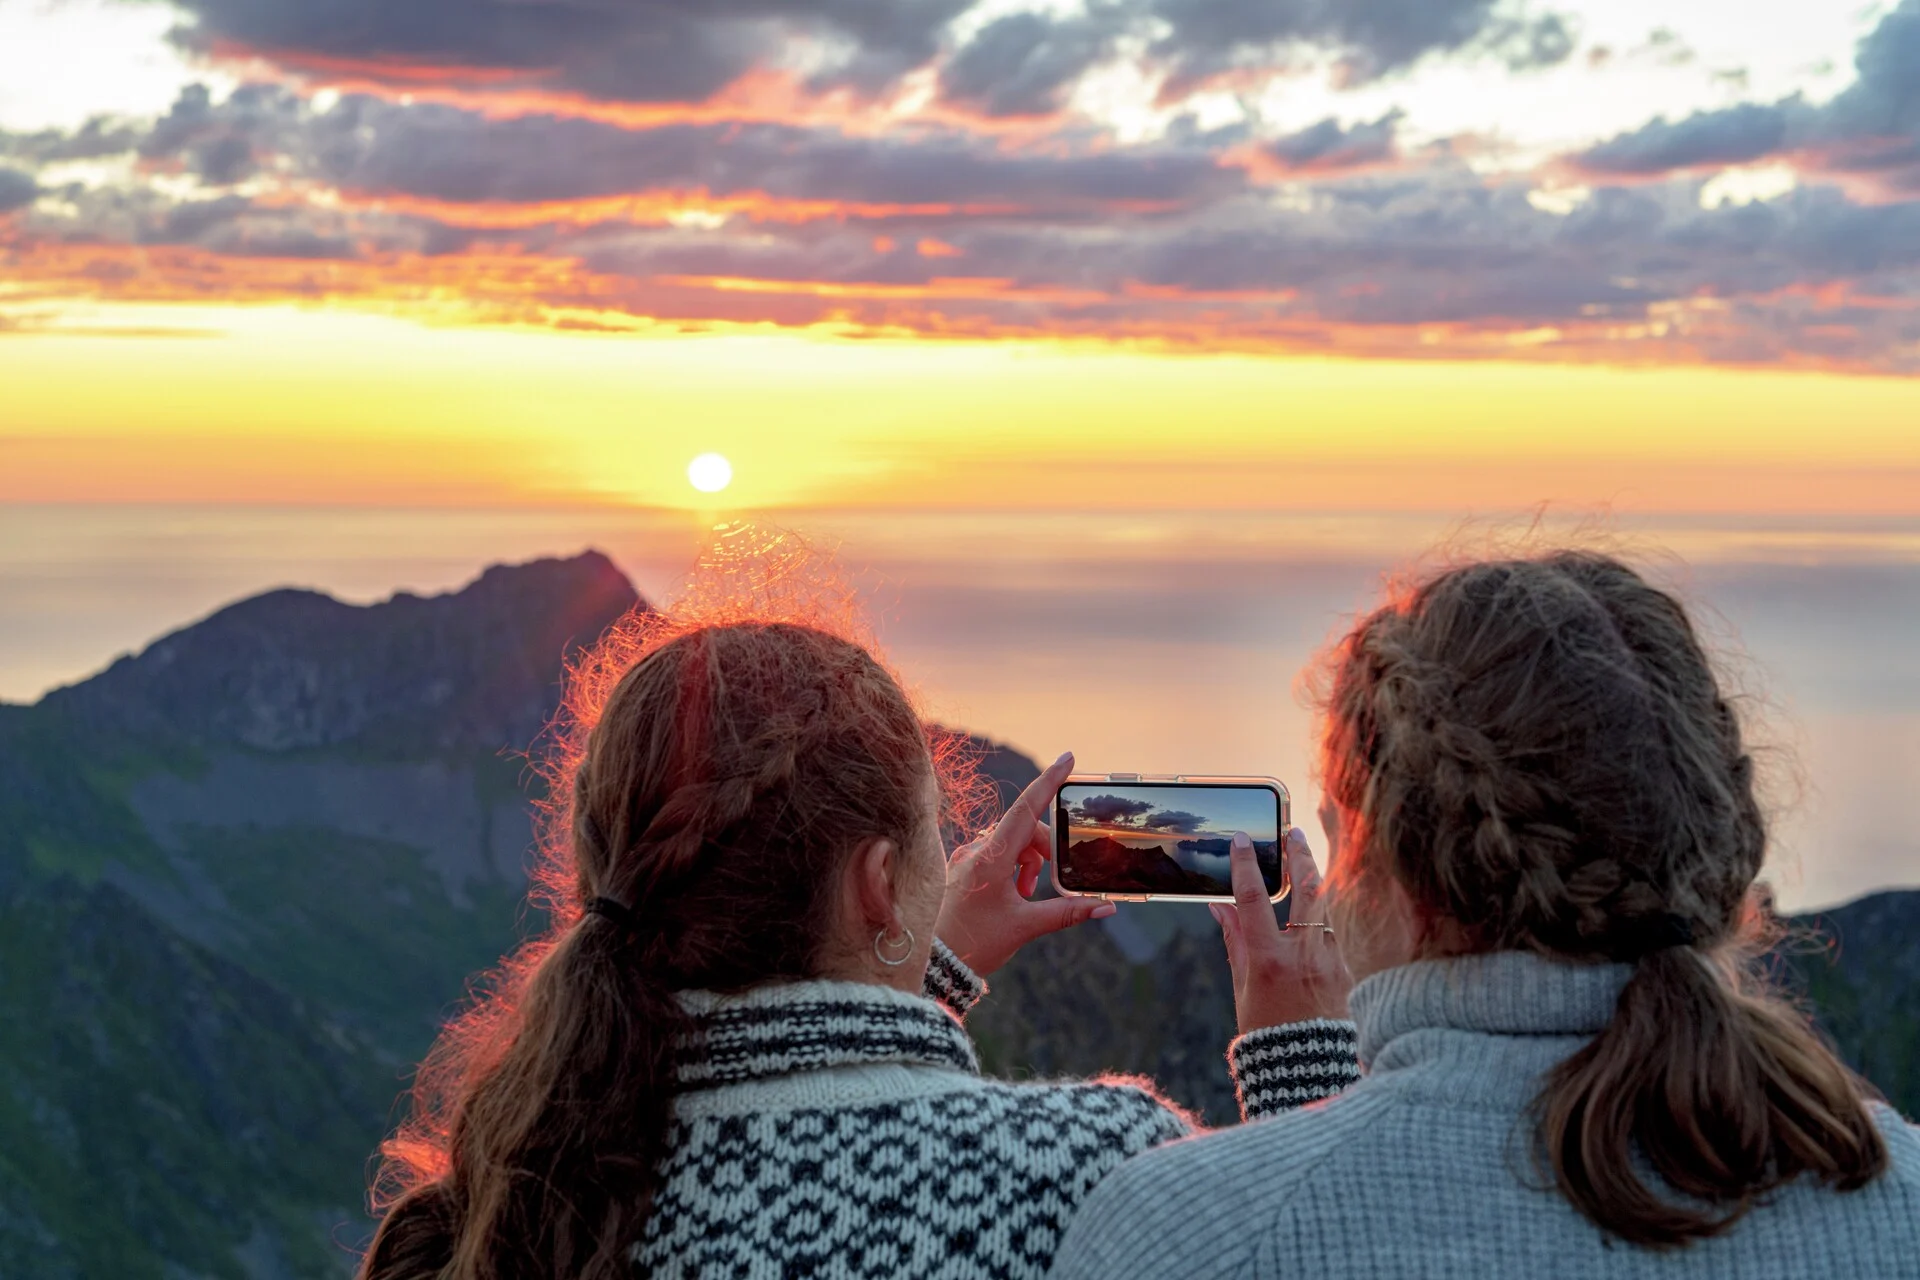 Two people capturing the Midnight Sun on mobile phone in Lofoten Norway by Getty Images